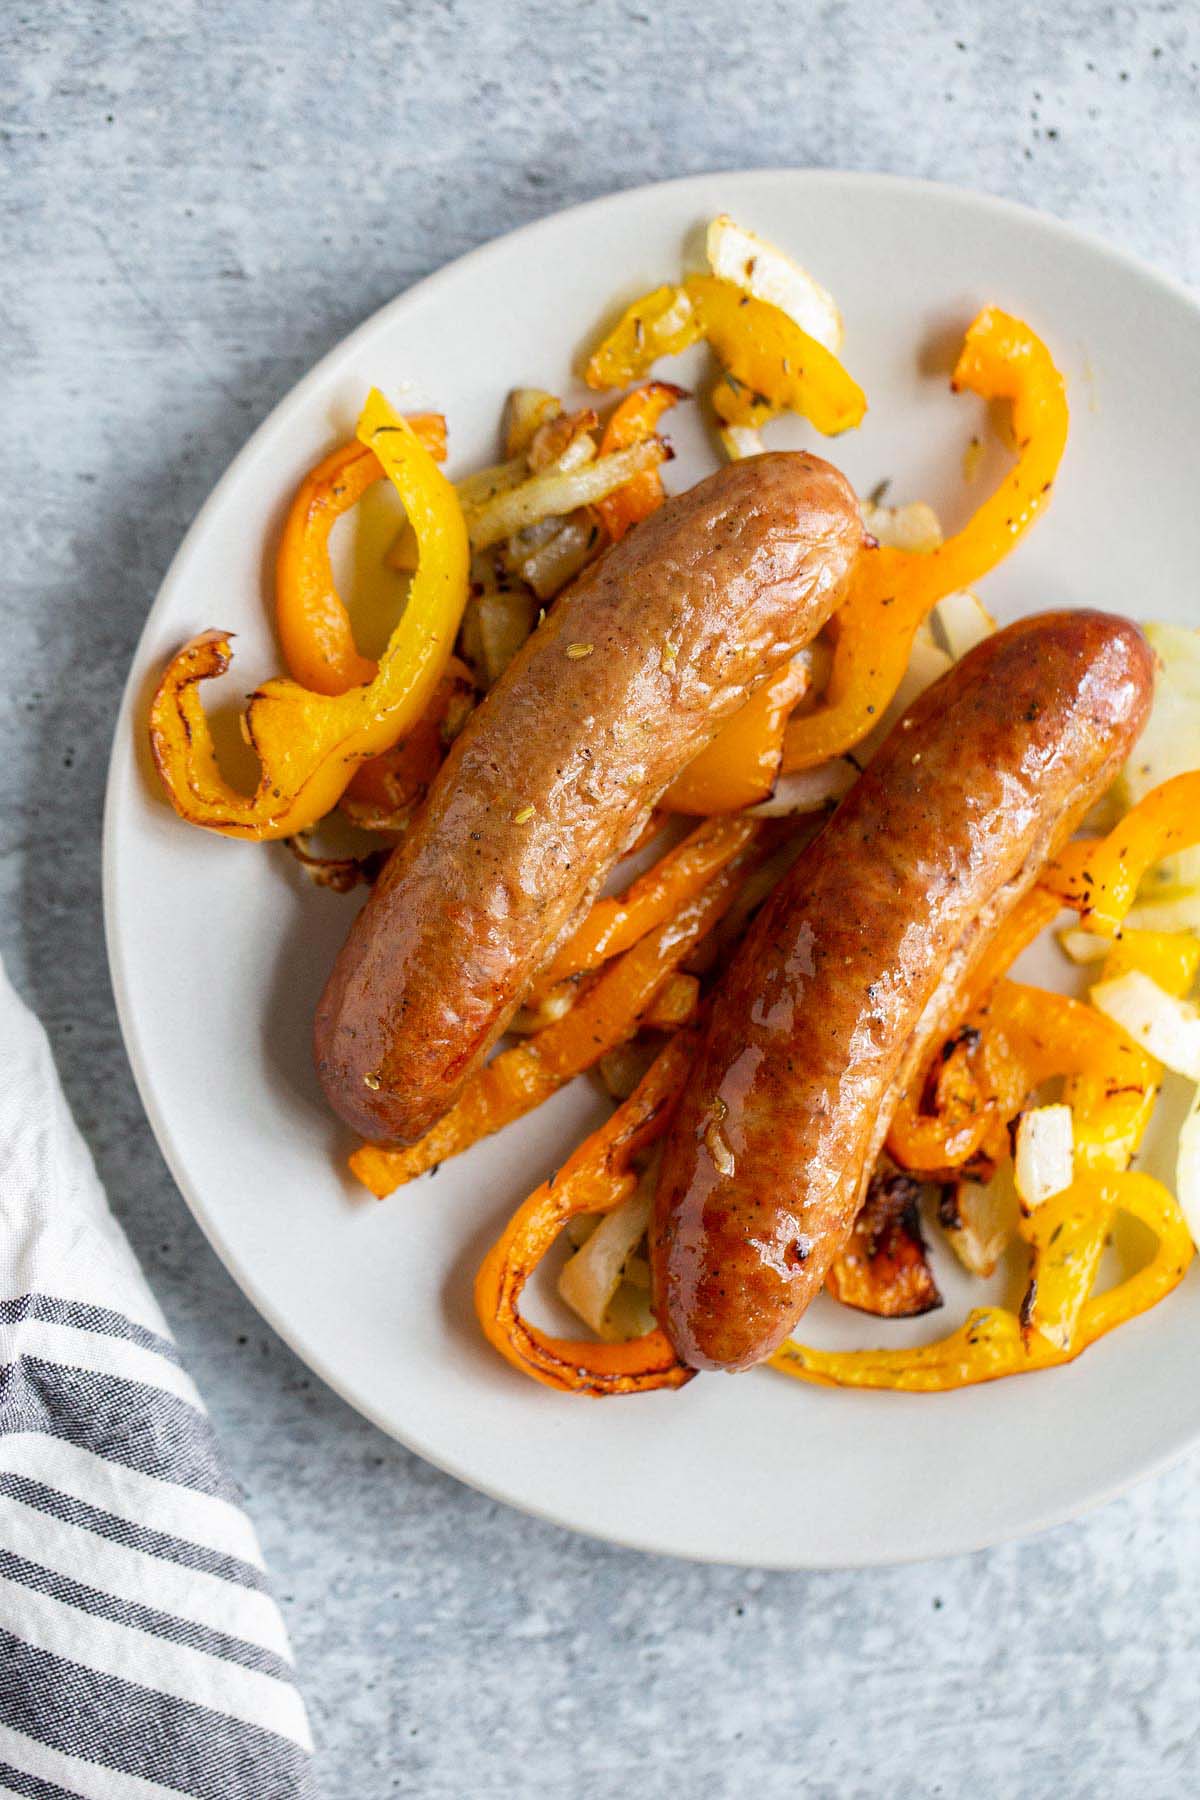 Sausage and peppers on a plate.